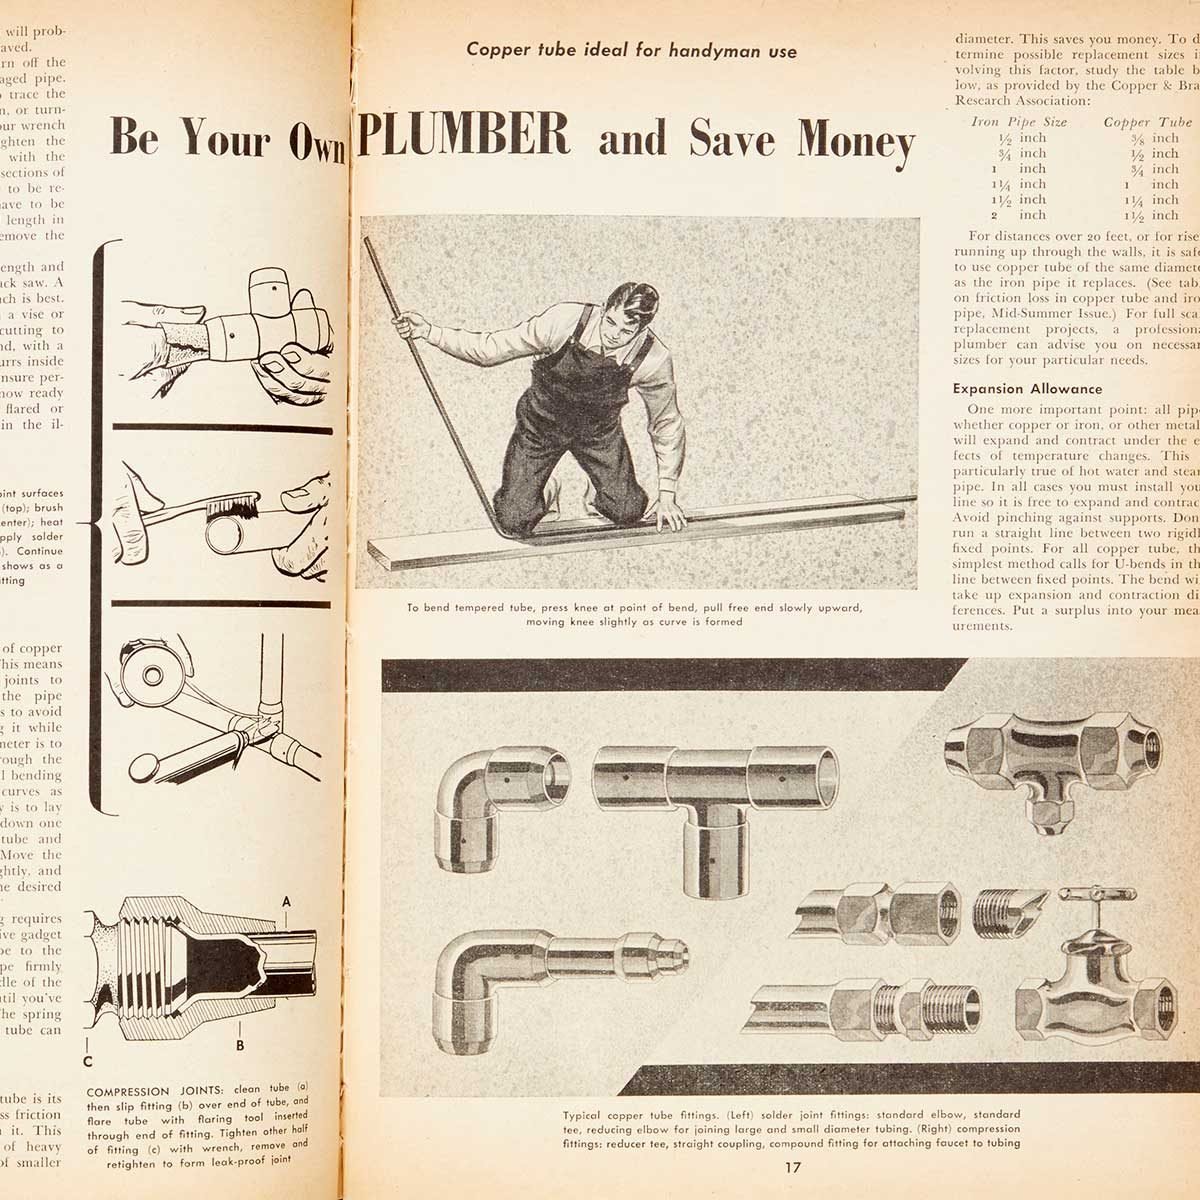 1951 Family Handyman Feature: Be Your Own Plumber